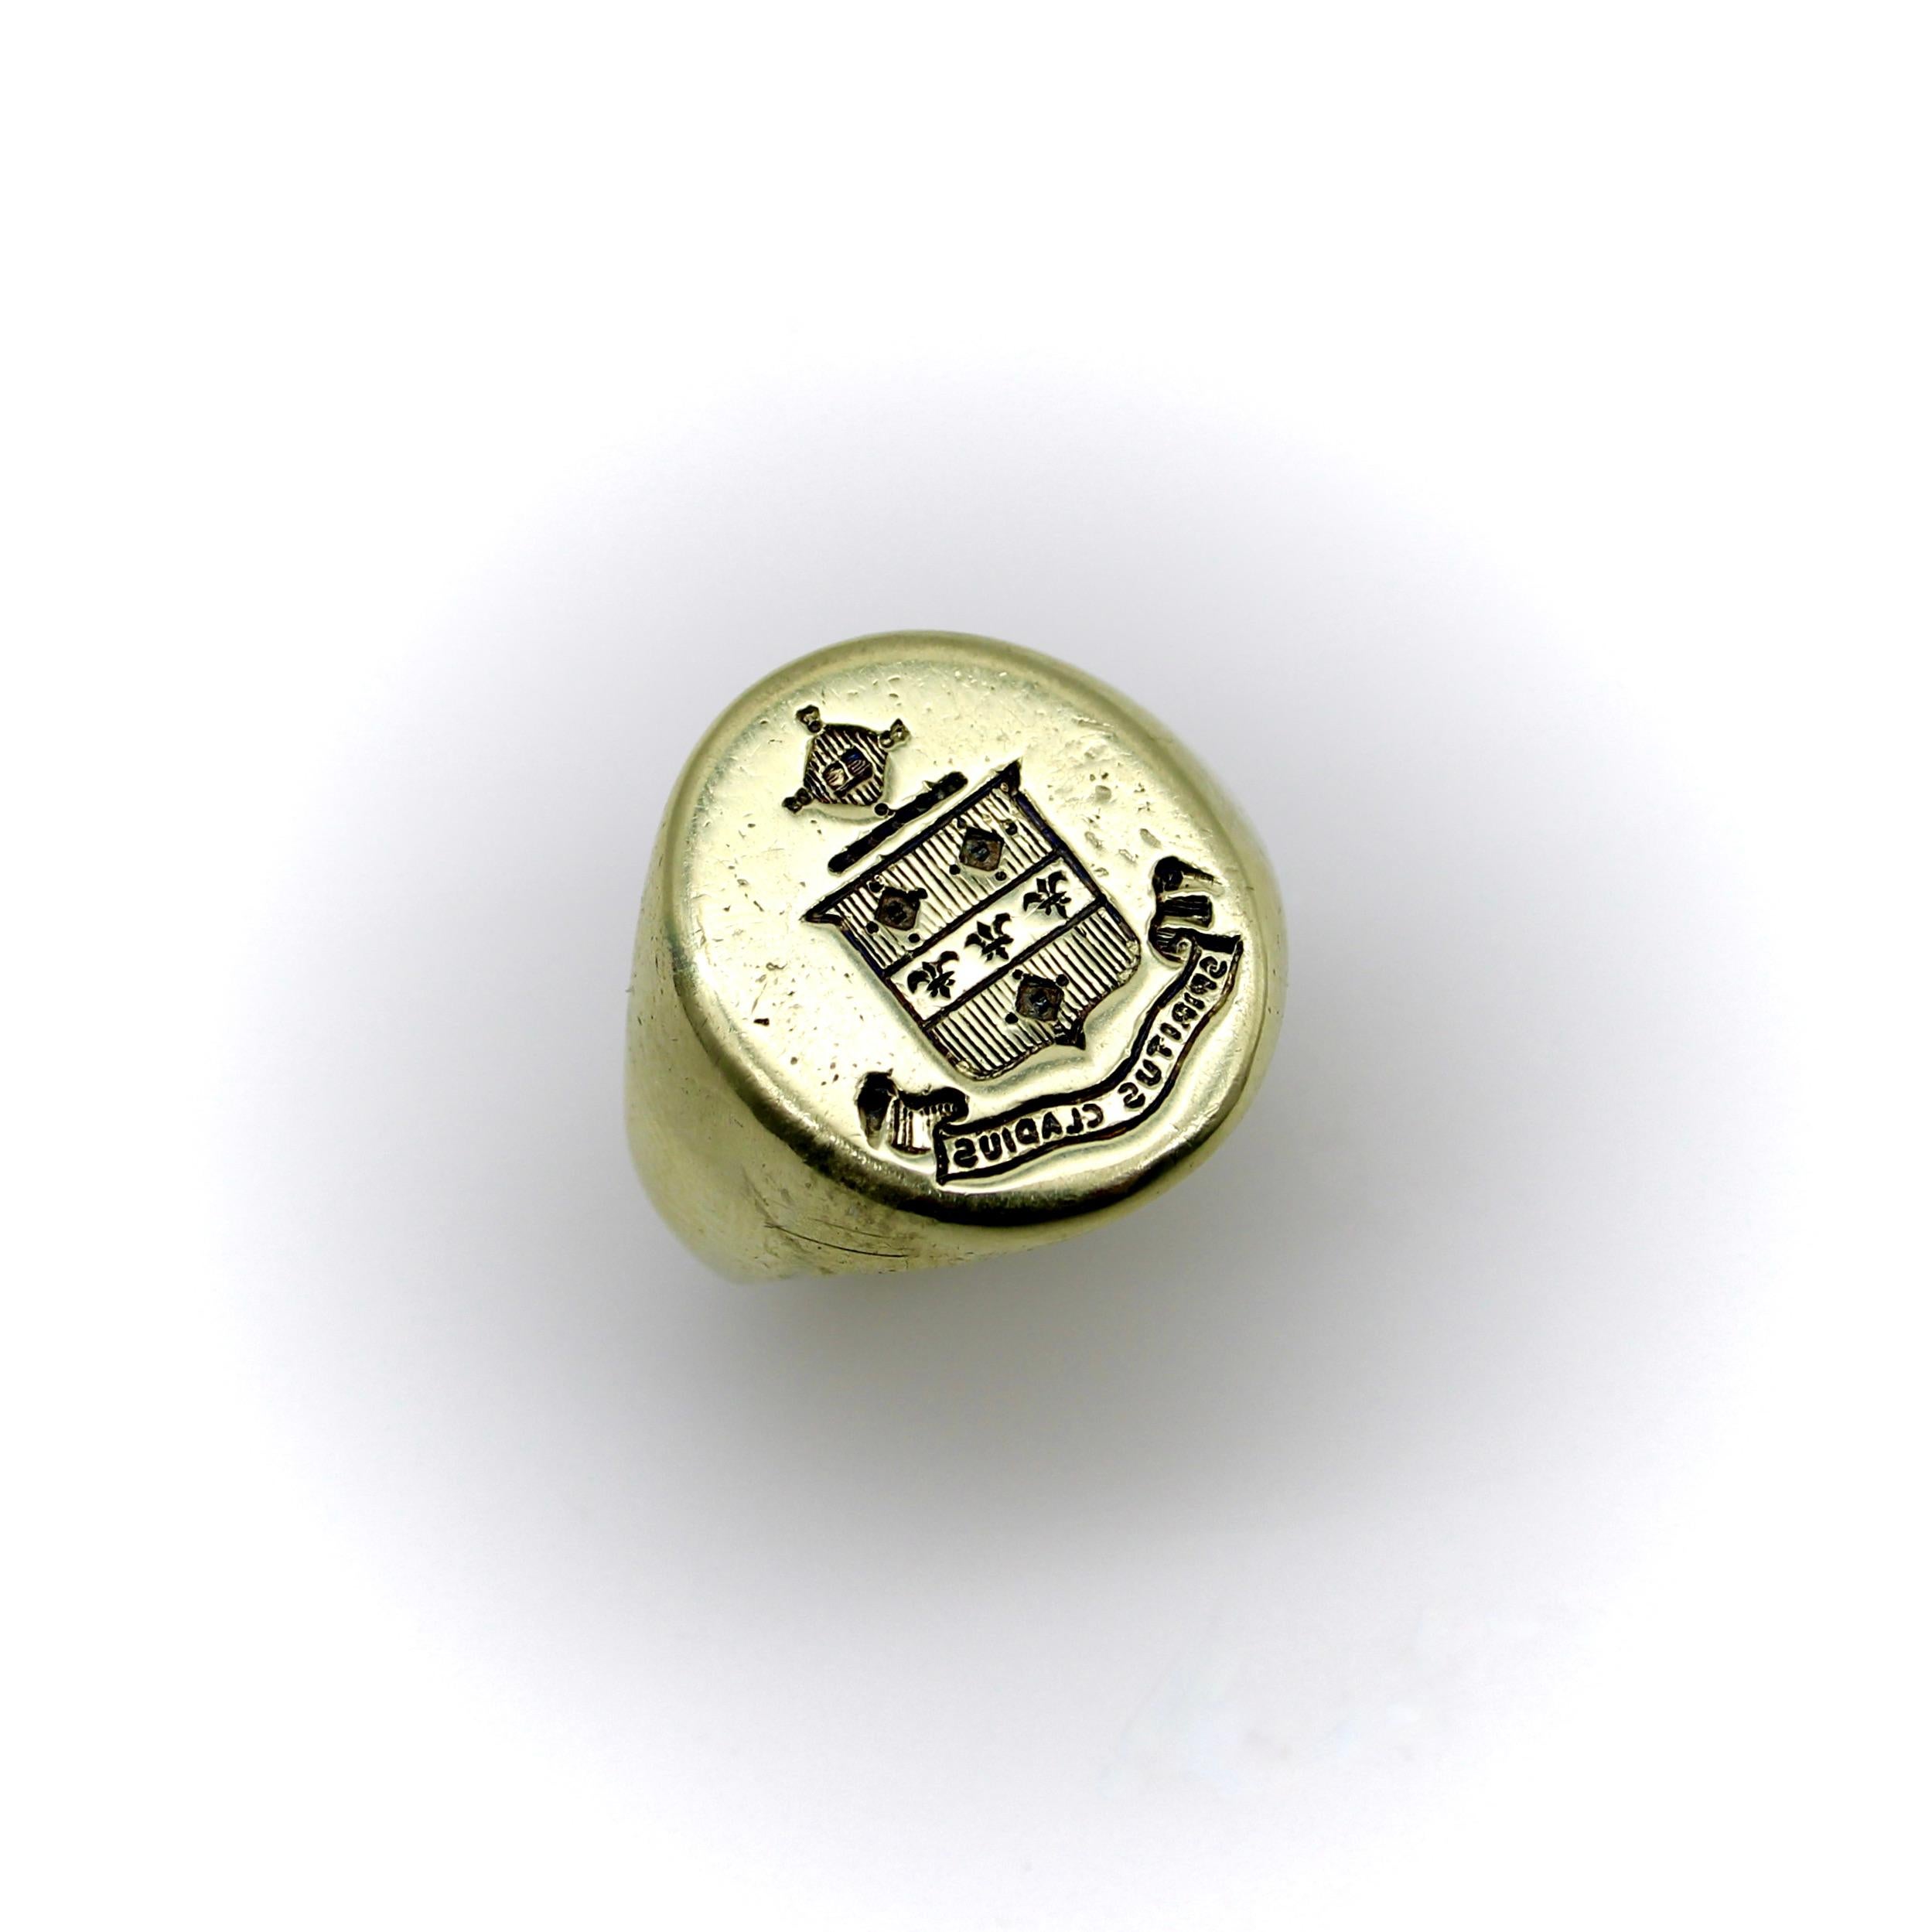 This 14k gold signet ring features a family crest of a shield topped with a radiating cross. The shield is divided into three sections, with vertical lines across the top and bottom sections, and a row of fleur-de-lis across the center. Above the